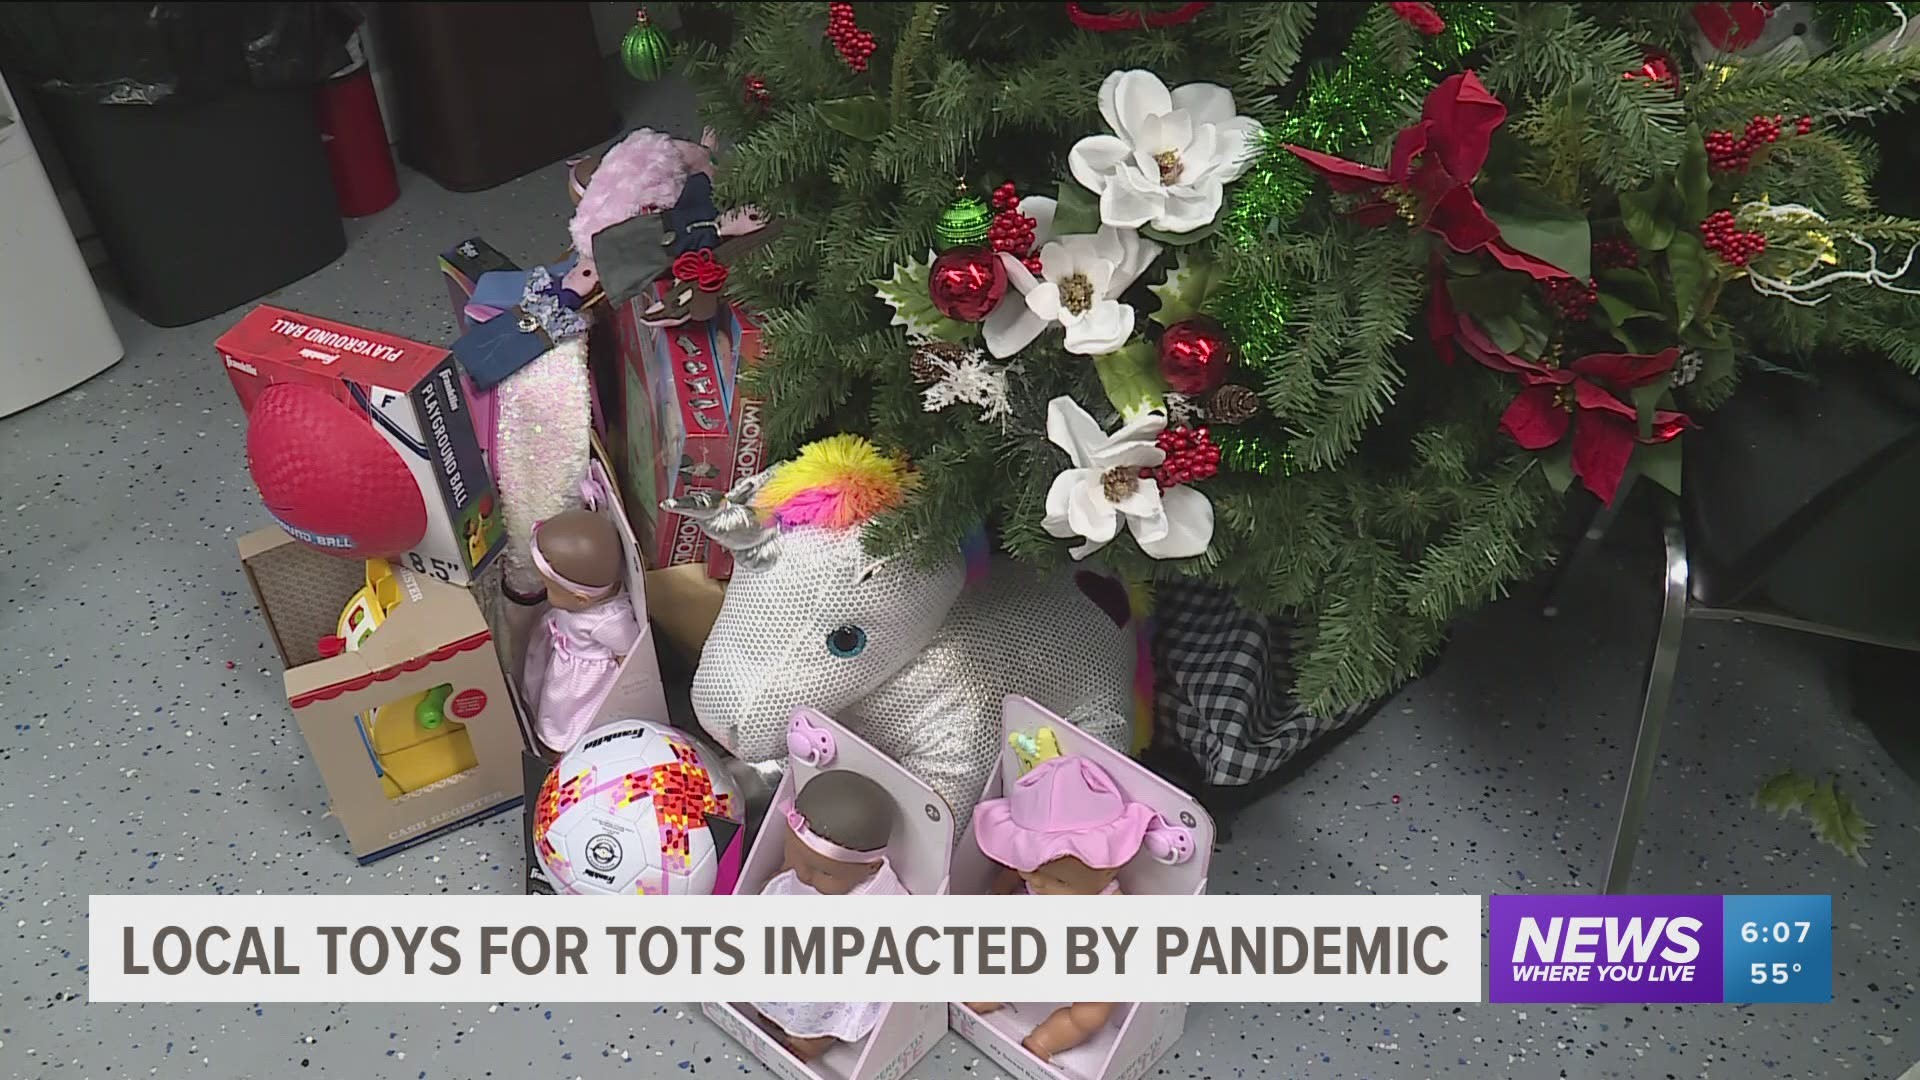 The organizations have taken two hits because of the COVID-19 pandemic, an increase in requests for toys and a decrease in donations.